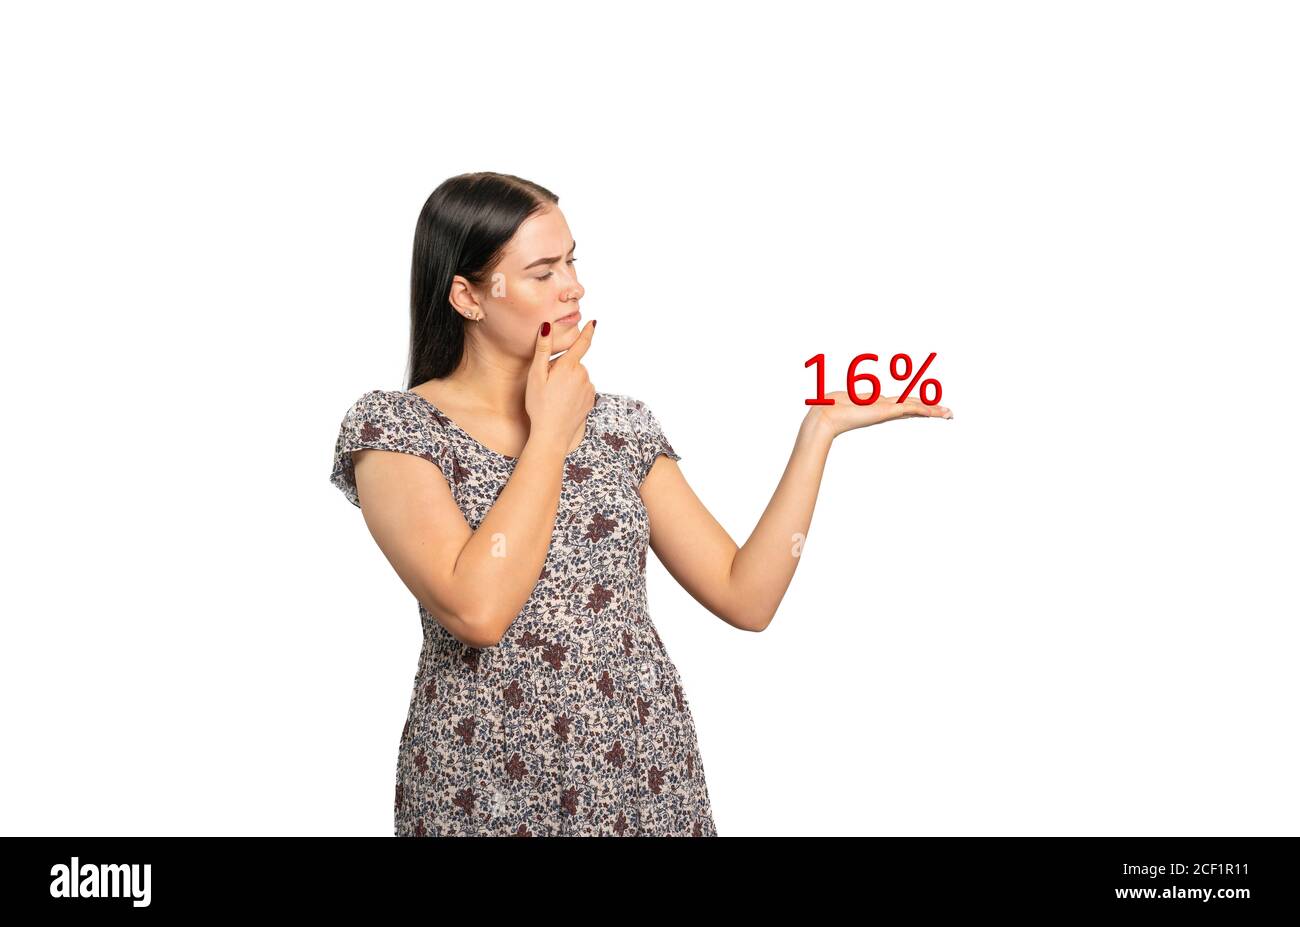 a concept image about the value added tax reduction to 16 percent in germany Stock Photo